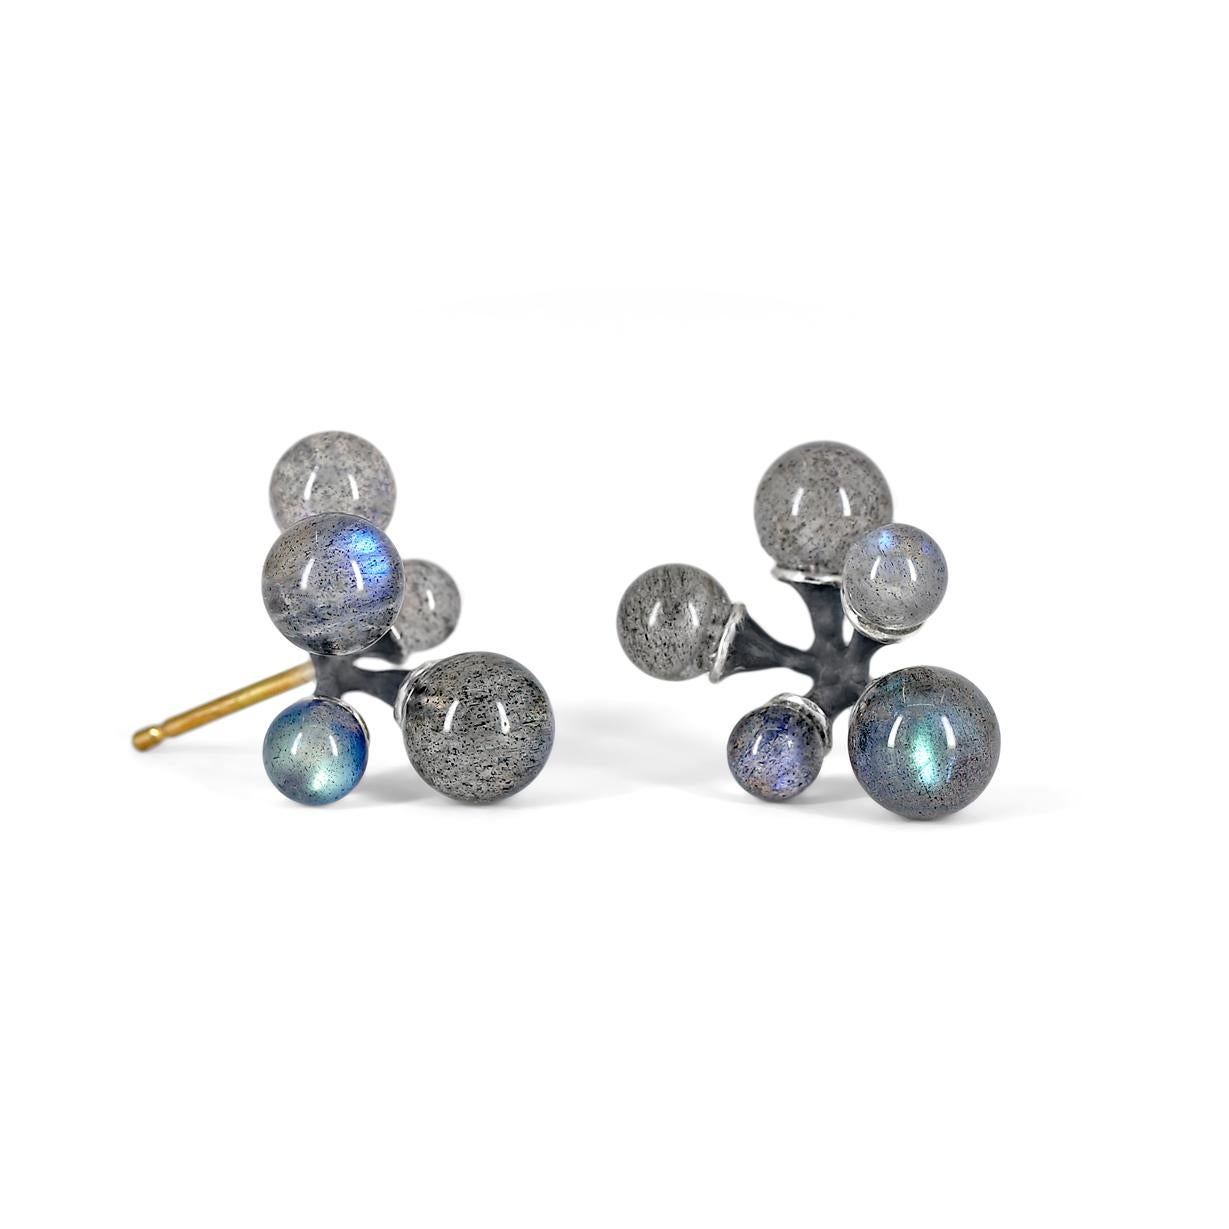 Micro Jacks Earrings handcrafted by renowned jewelry designer John Iversen in oxidized sterling silver with ten assorted size labradorite spheres on 18k yellow gold posts with sterling silver backs. Stamped 750. Backs stamped 585.

About the Maker -